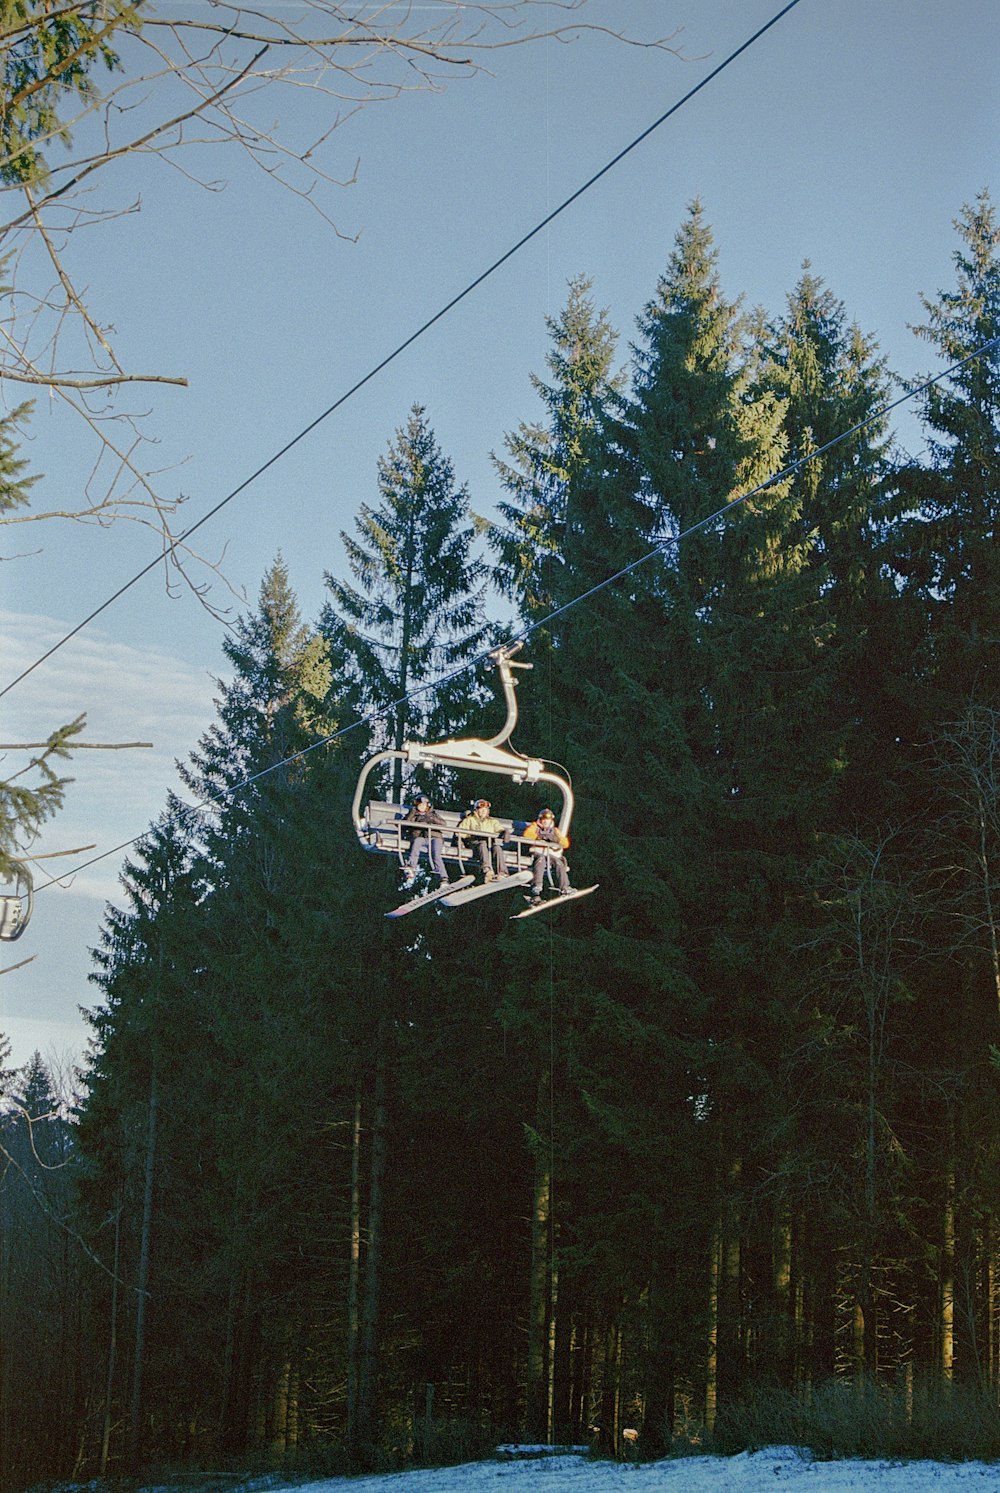 a person riding a ski lift over a forest